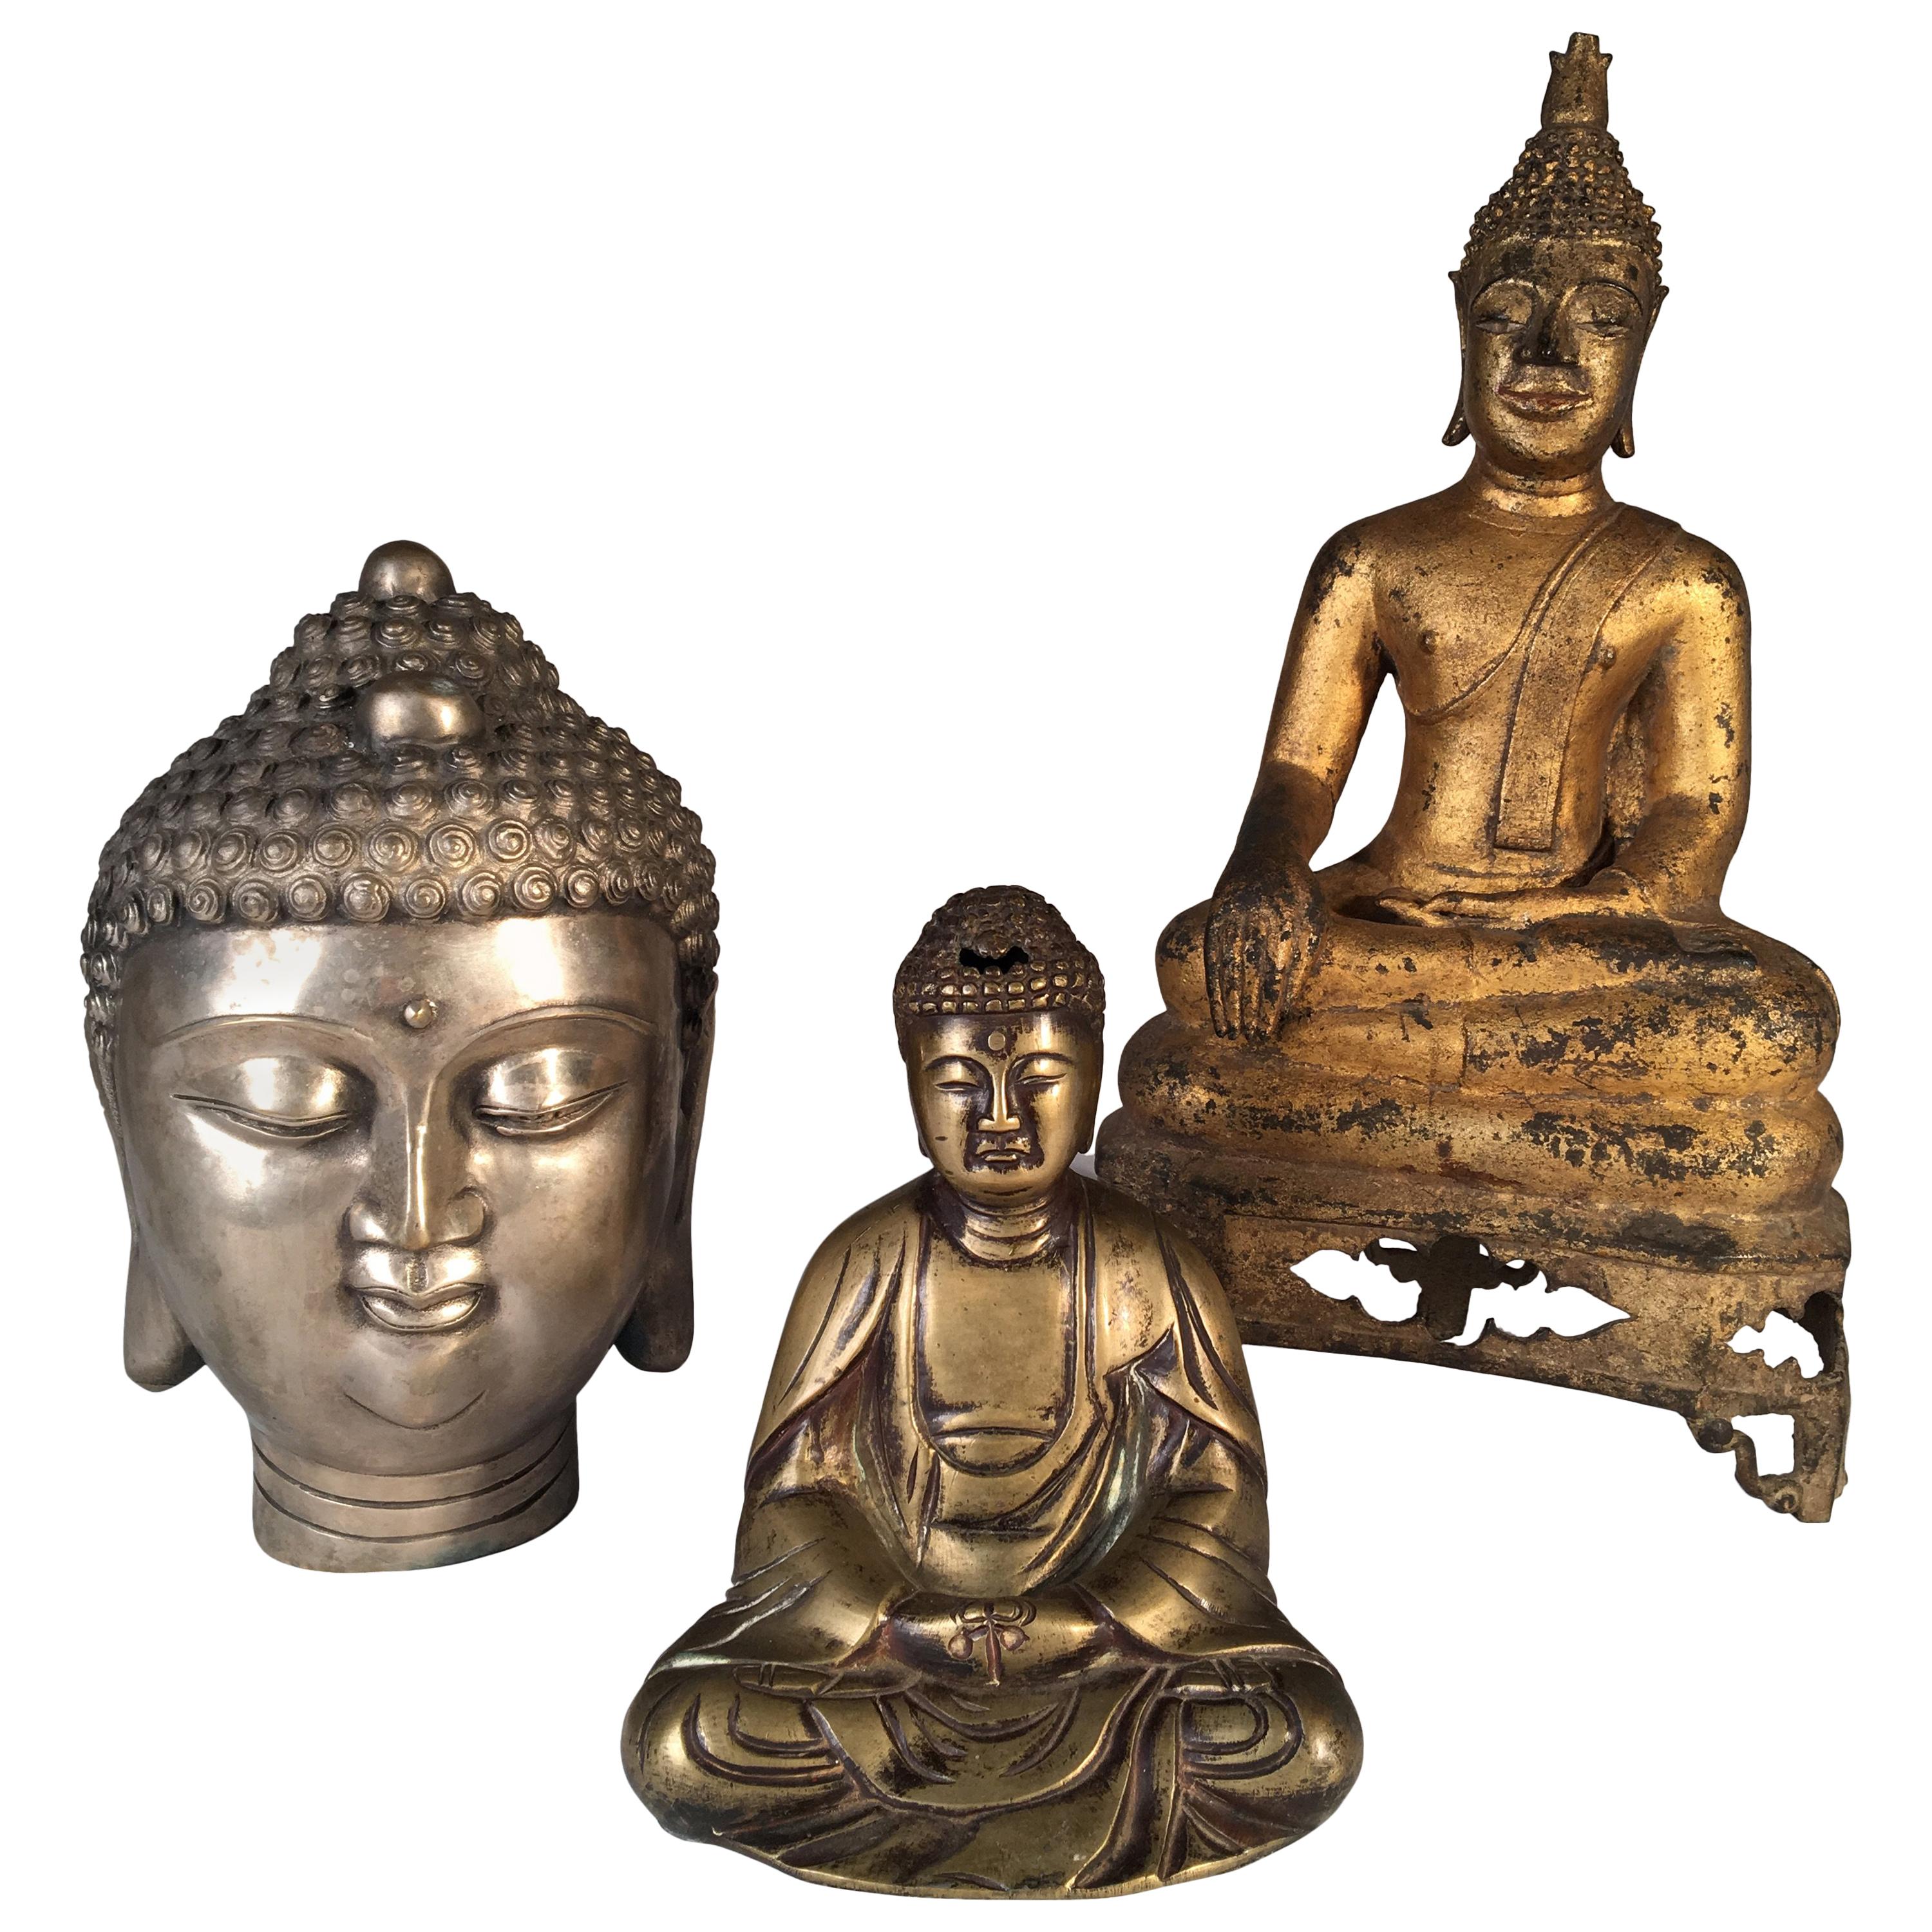 Collection of 3 Metal Buddhas